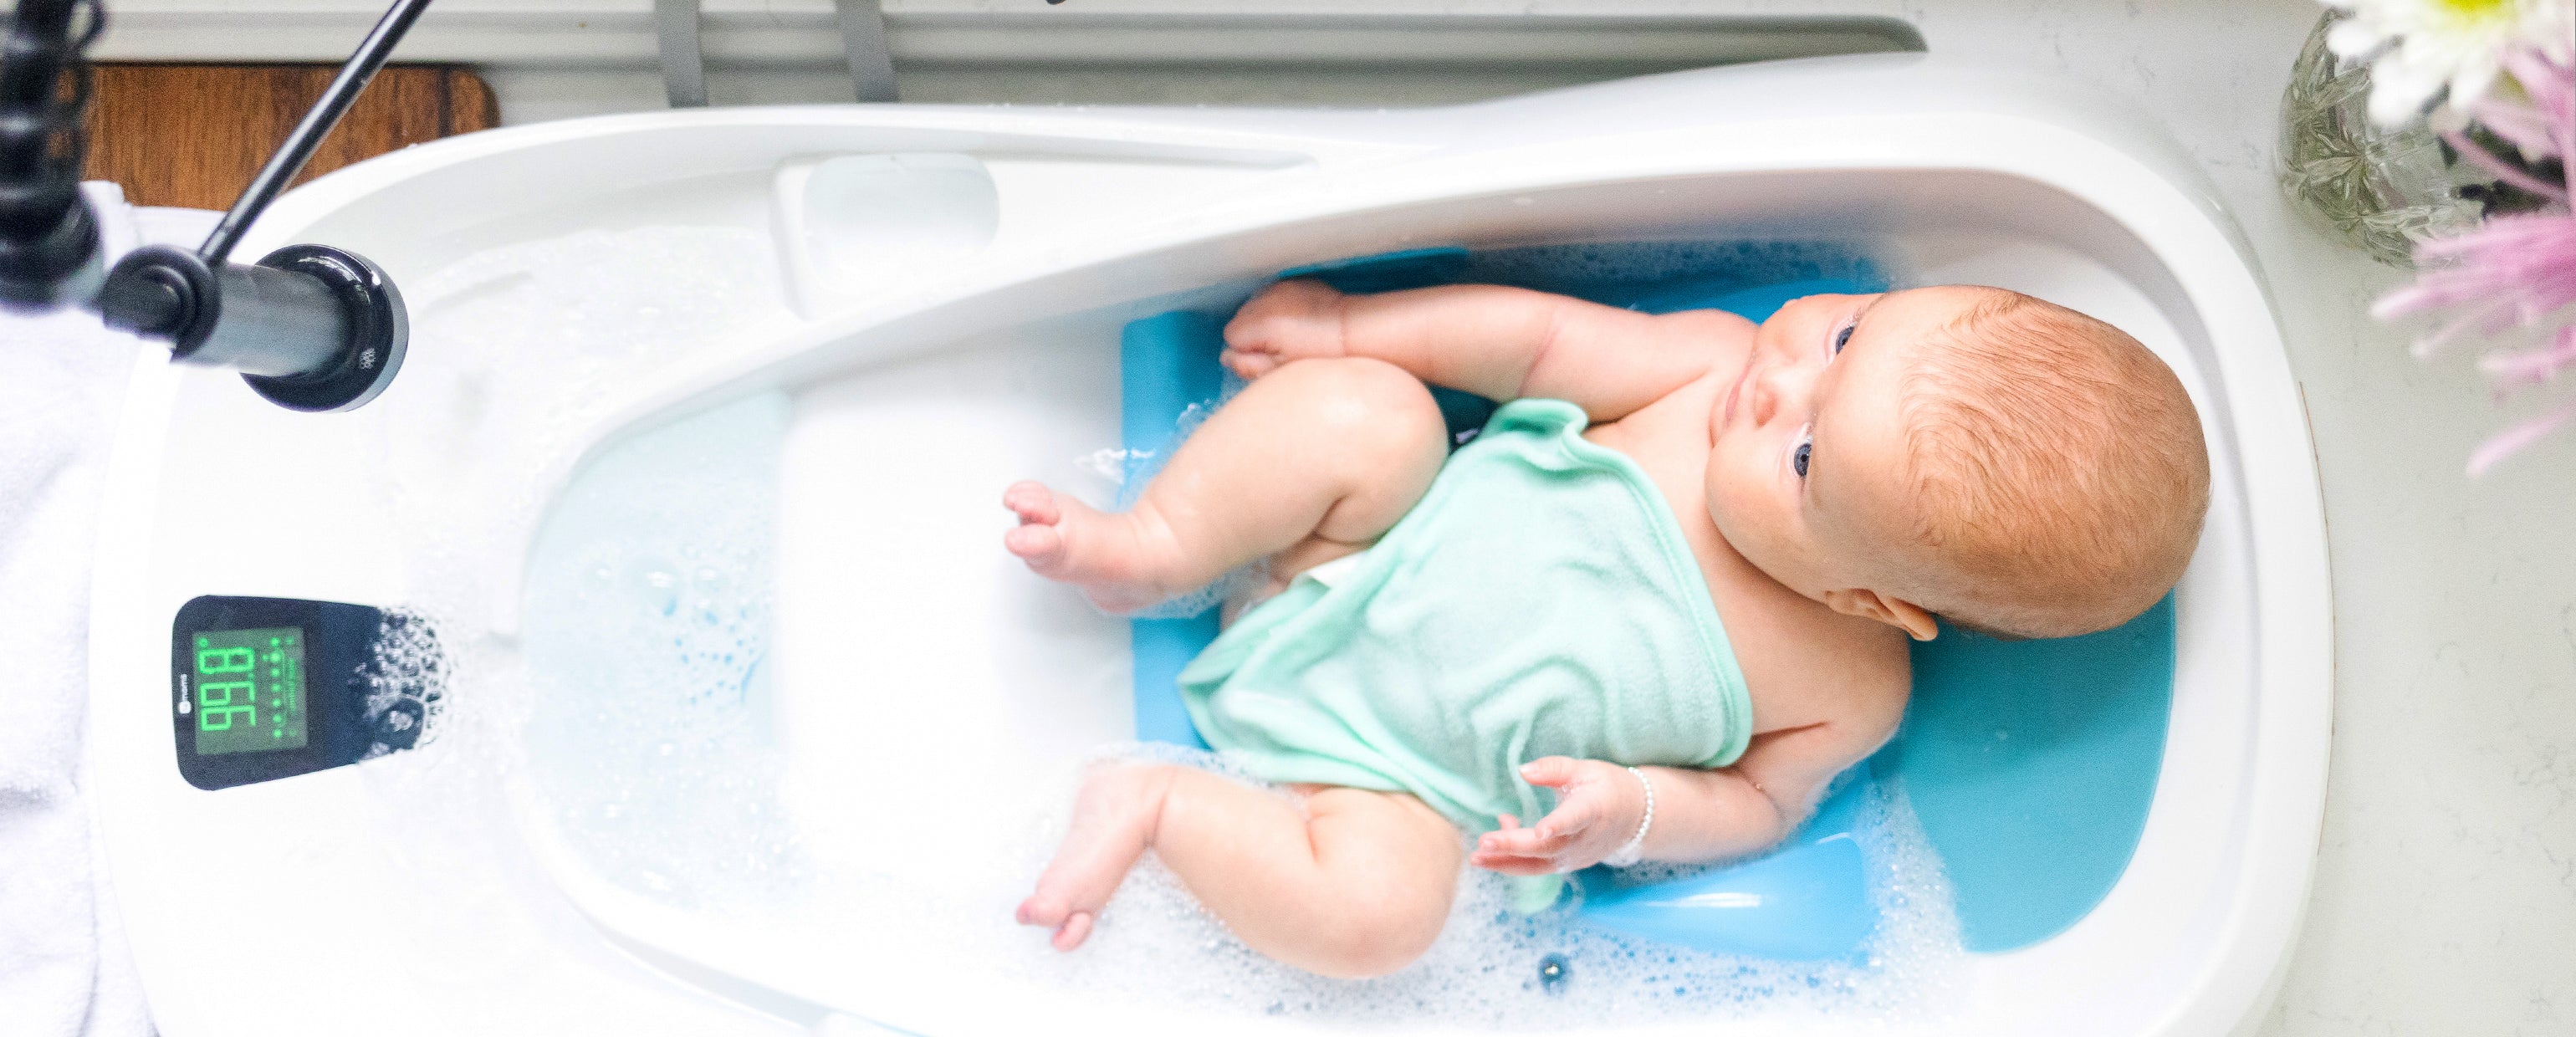 Sponge Bathing your Baby - What You Need to Know